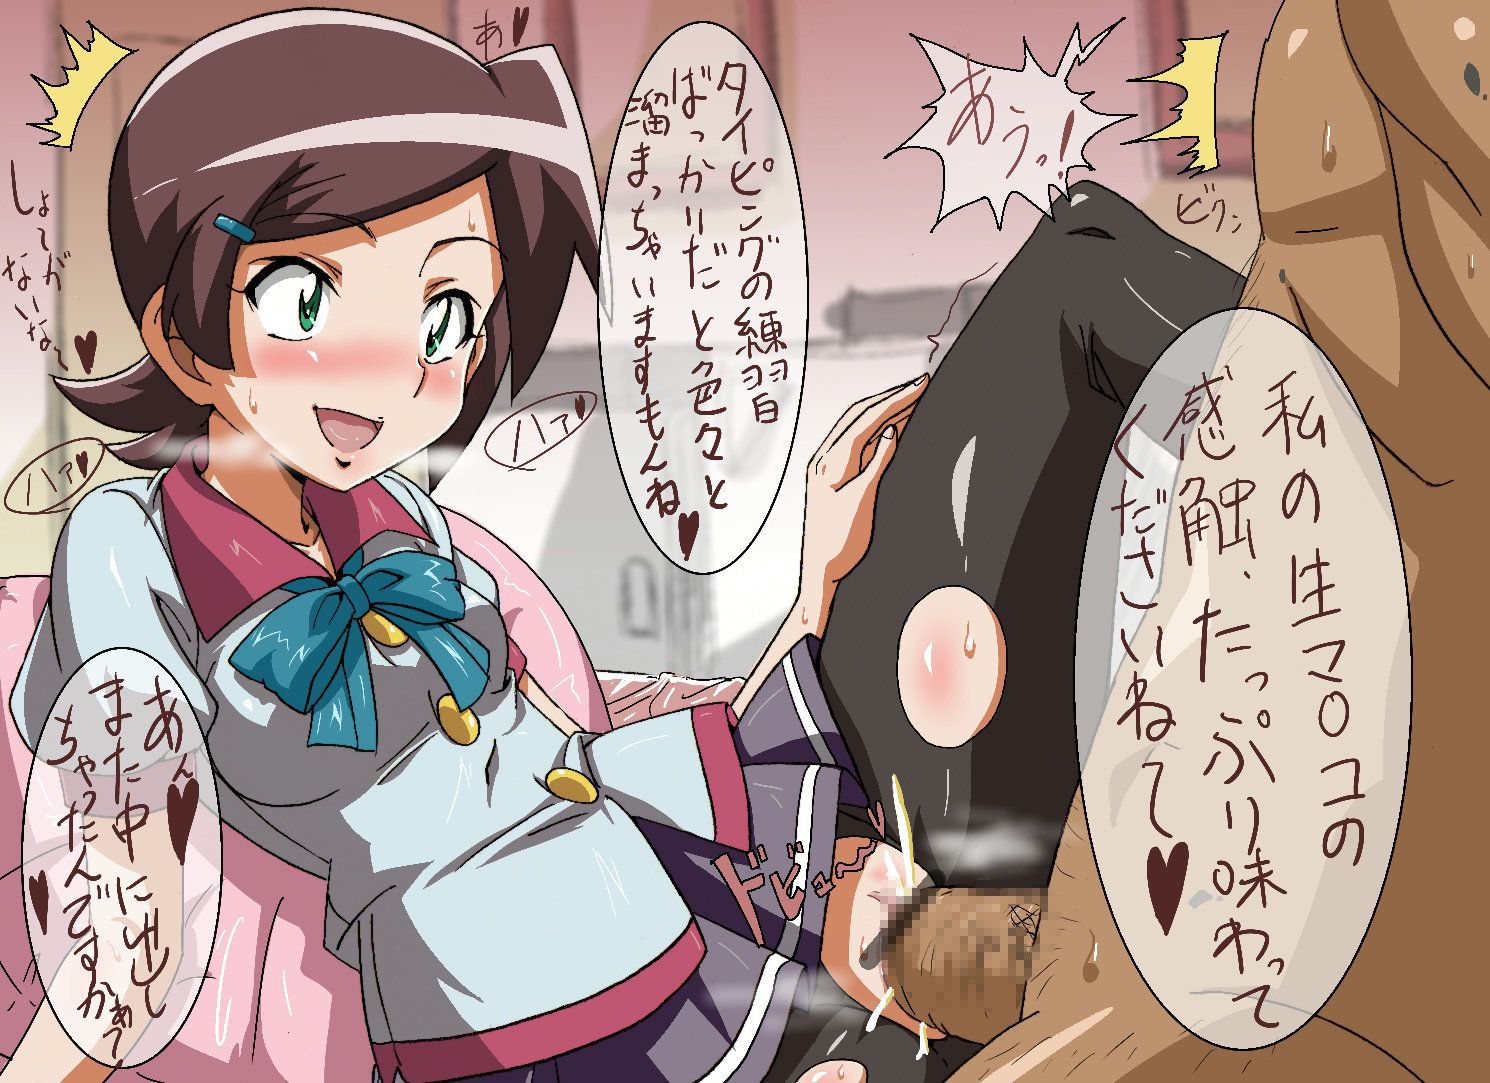 [Pokemon] heroine of Pokemon, trainer MoE erotic images part 5 [dialogue with extra] 13